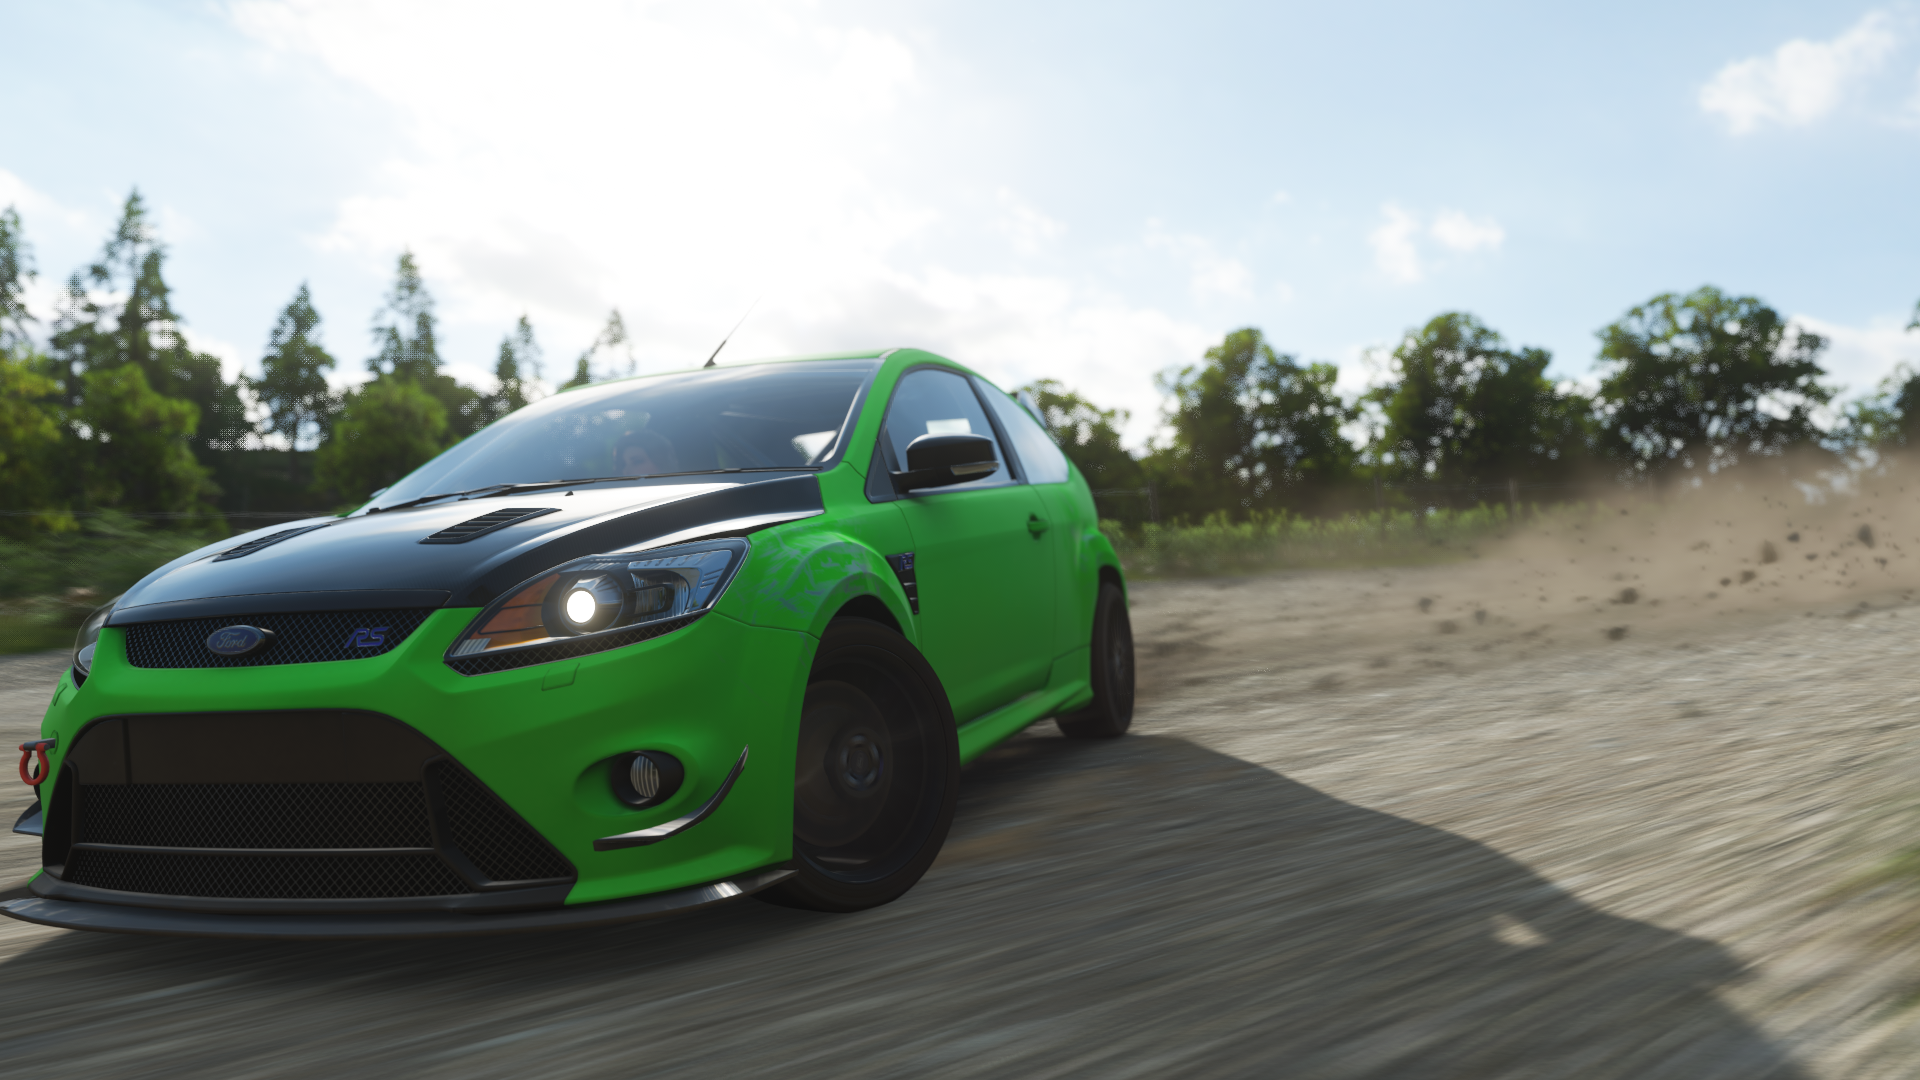 General 1920x1080 Forza Horizon 4 screen shot car Ford Ford Focus Ford Focus RS video games British cars PlaygroundGames